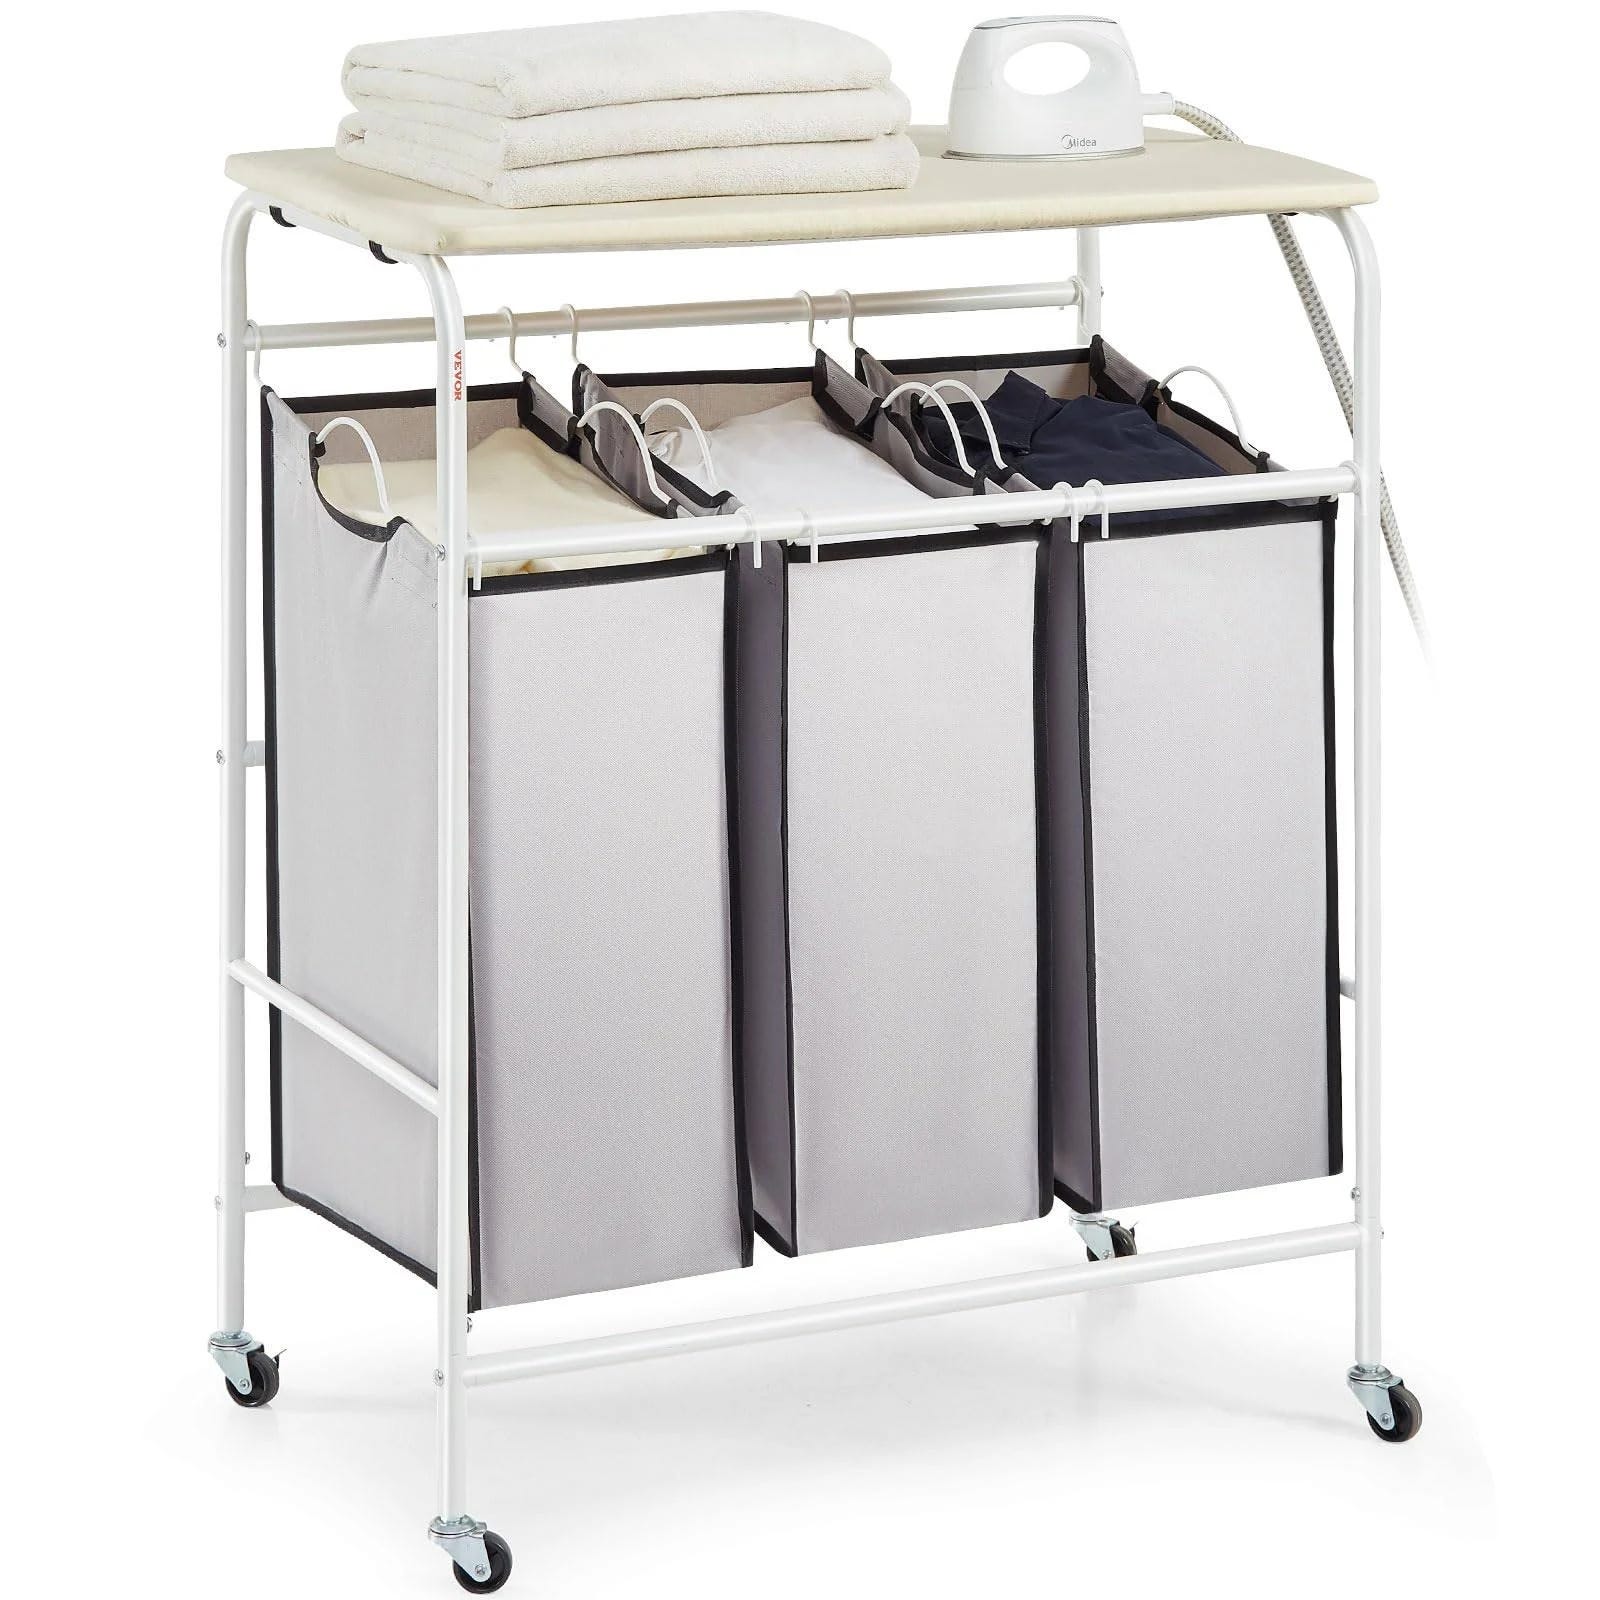 Practical 3-Section Laundry Sorter Cart with Ironing Board | Image